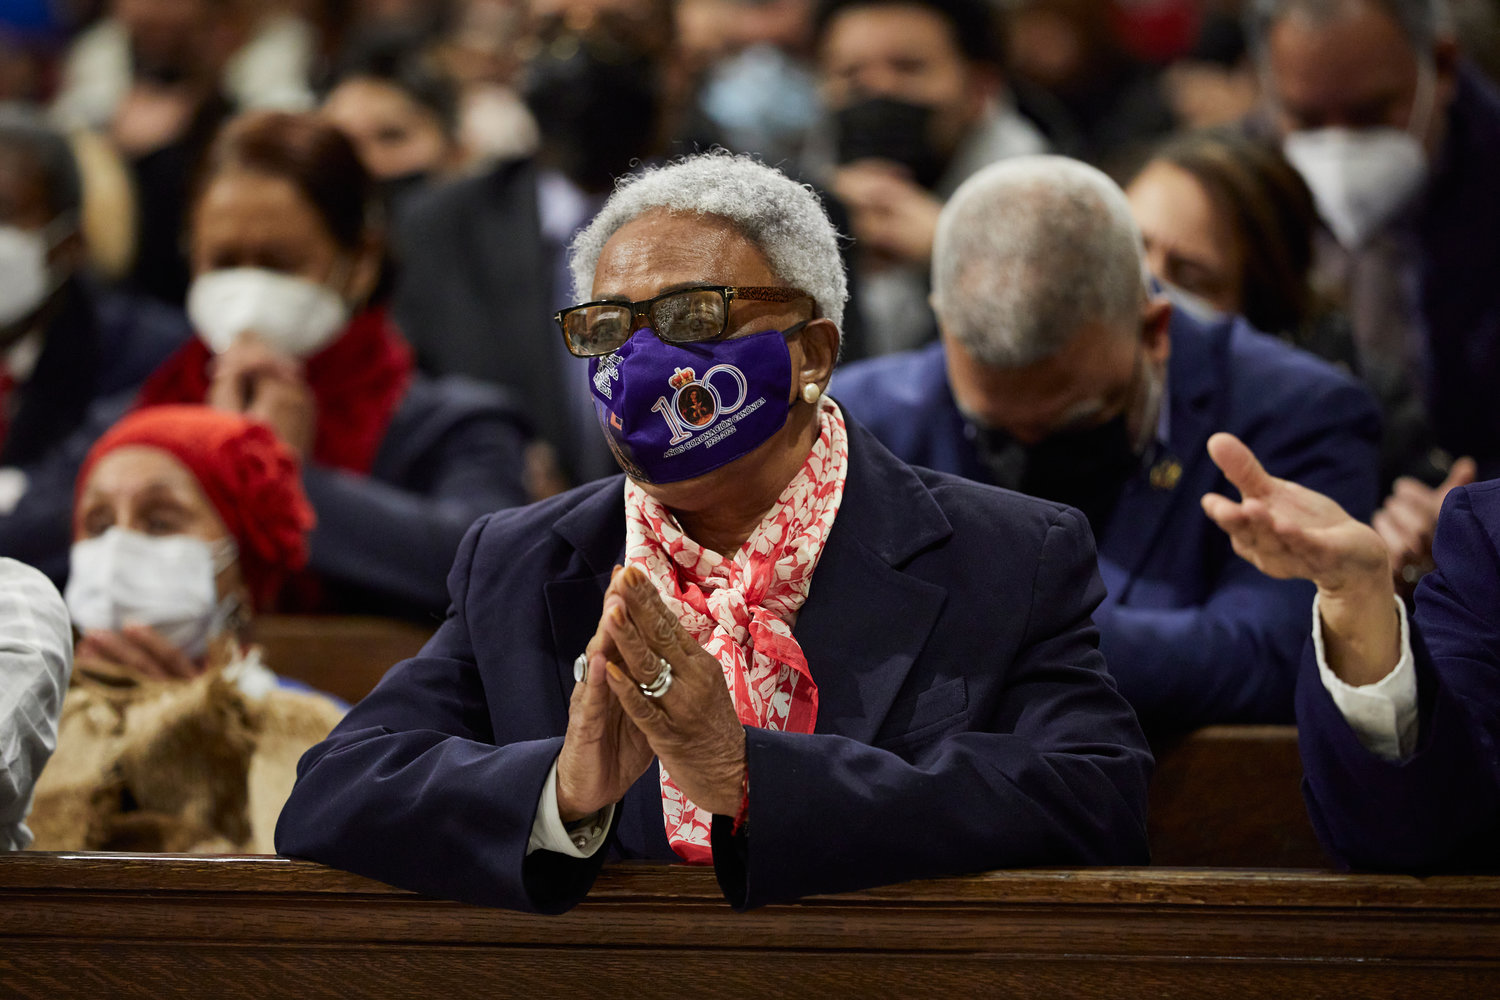 A woman prays at the annual Mass honoring Our Lady of Altagracia at St. Patrick’s Cathedral Jan. 16. Her mask refers to the centennial of the canonical coronation of Our Lady of Altagracia, which is being observed in the Dominican Republic and New York.